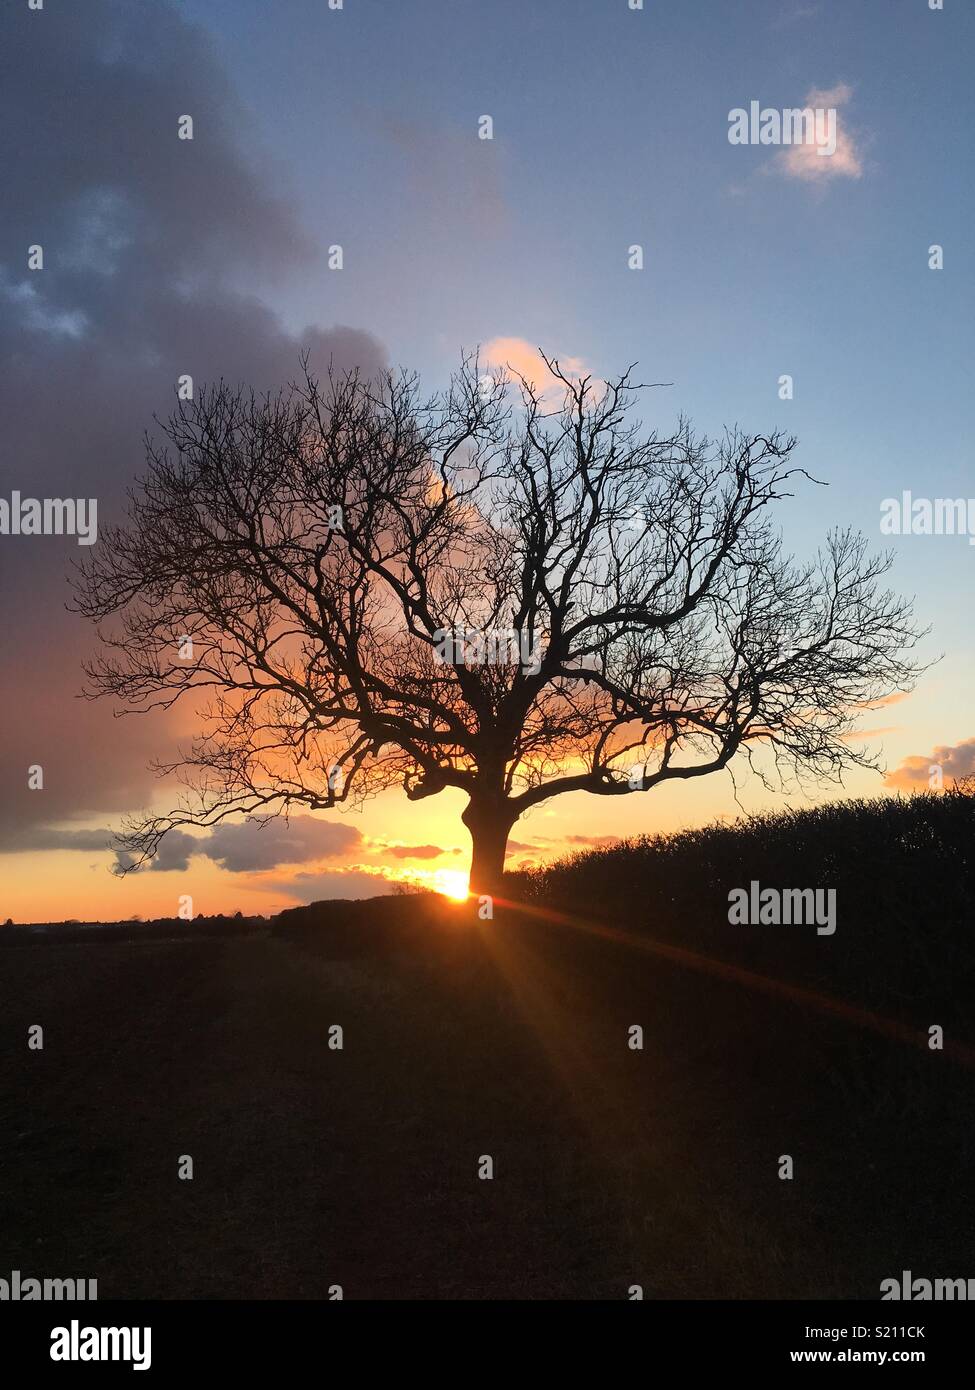 Setting sun over a lonesome tree in the middle of a field Stock Photo